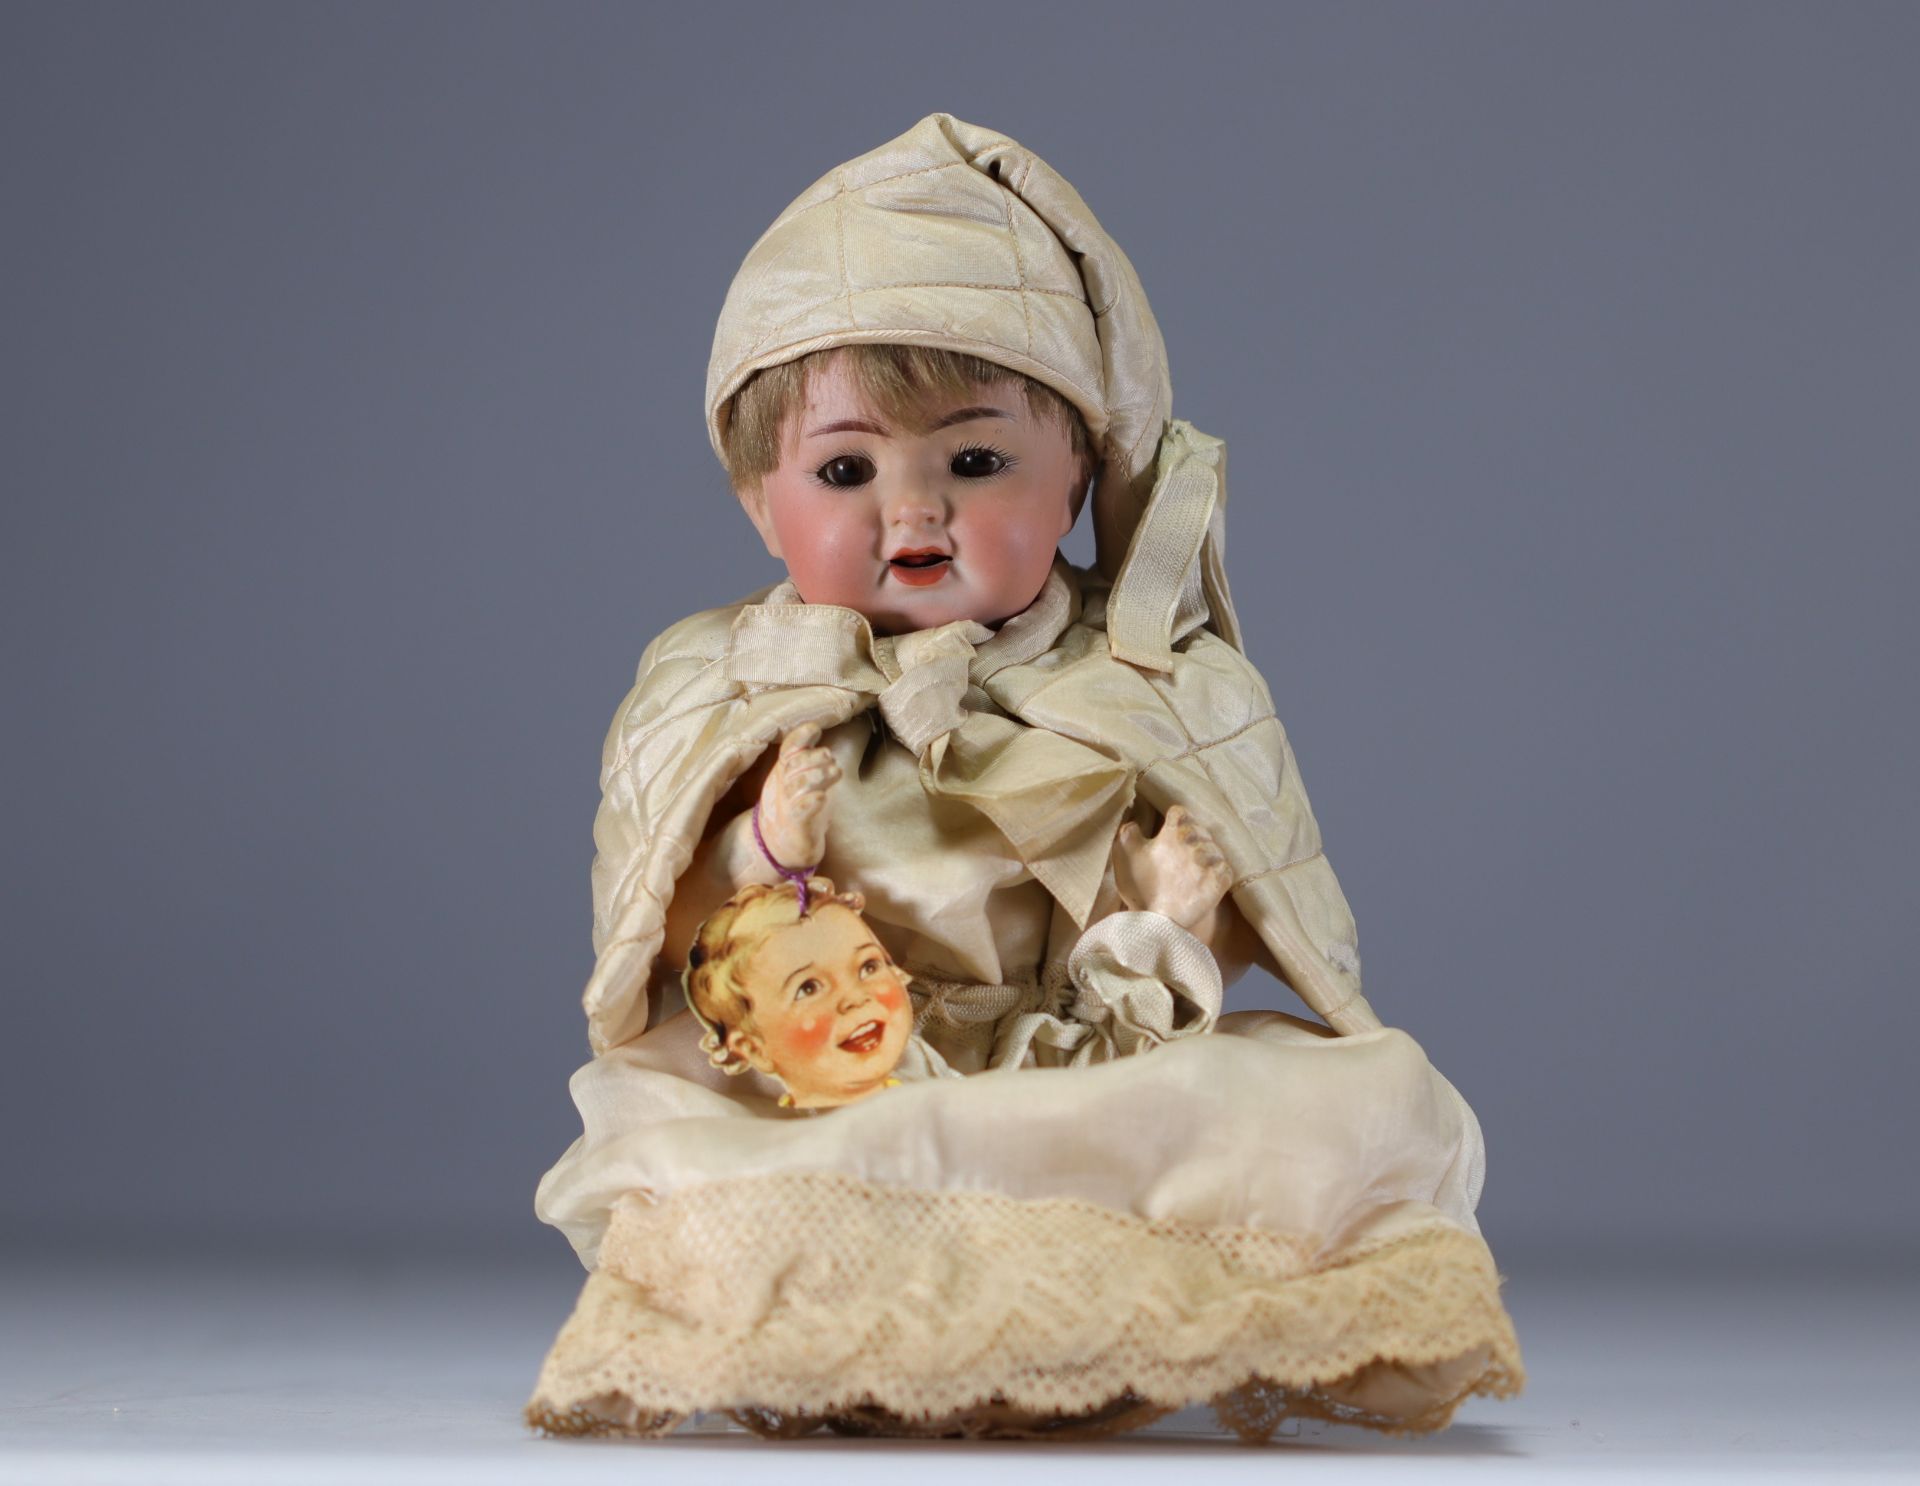 KAMMER and REINHARDT - Baby boy character, nÂ° 126, between 1886 and 1930.